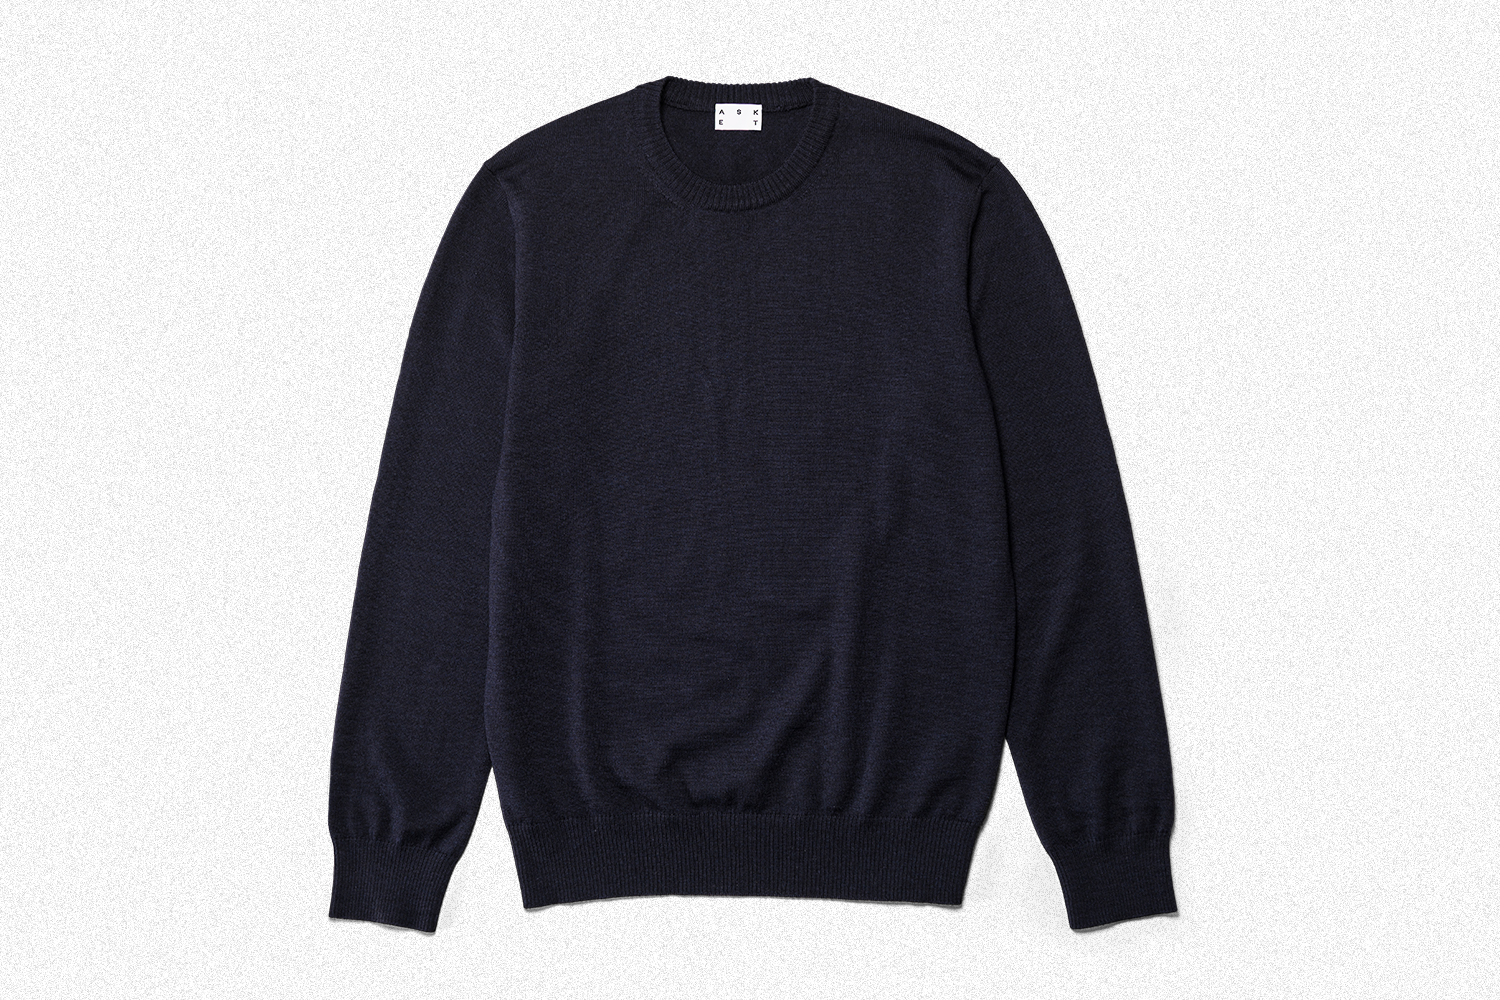 The Merino Sweater in navy blue from Swedish brand Asket